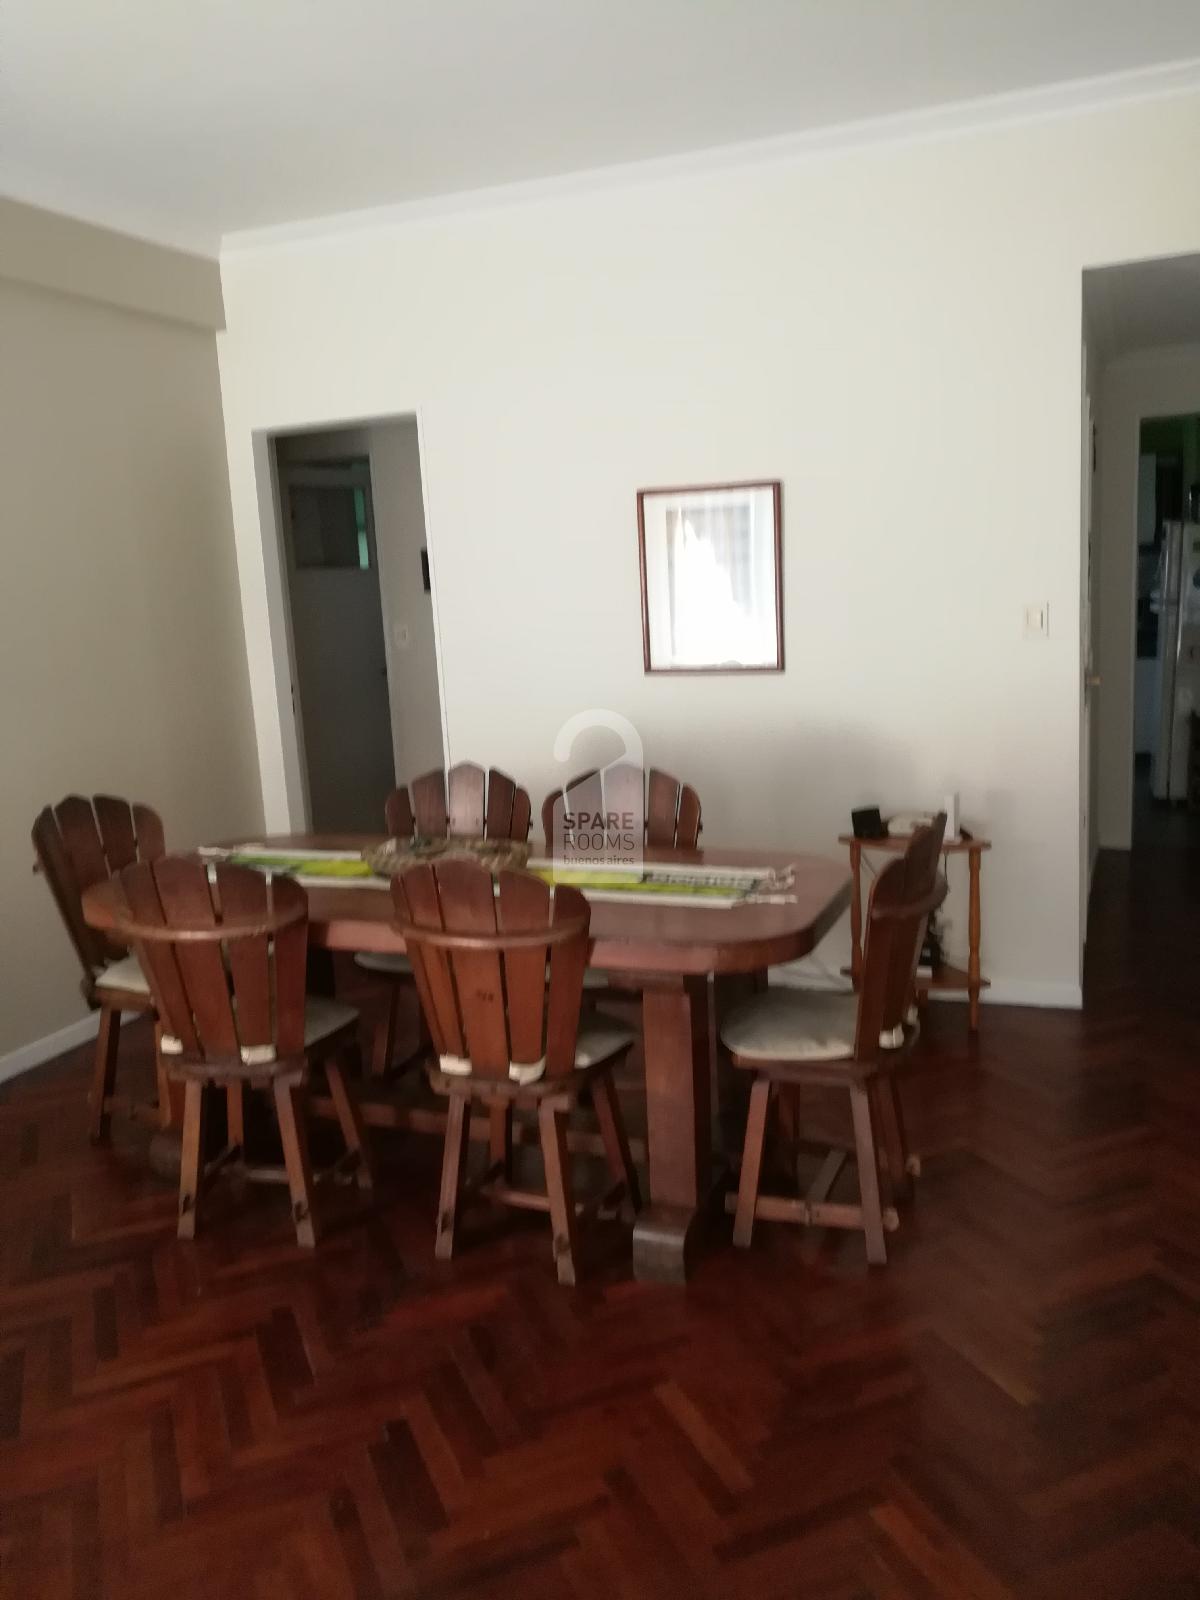 dinning room with table and chairs